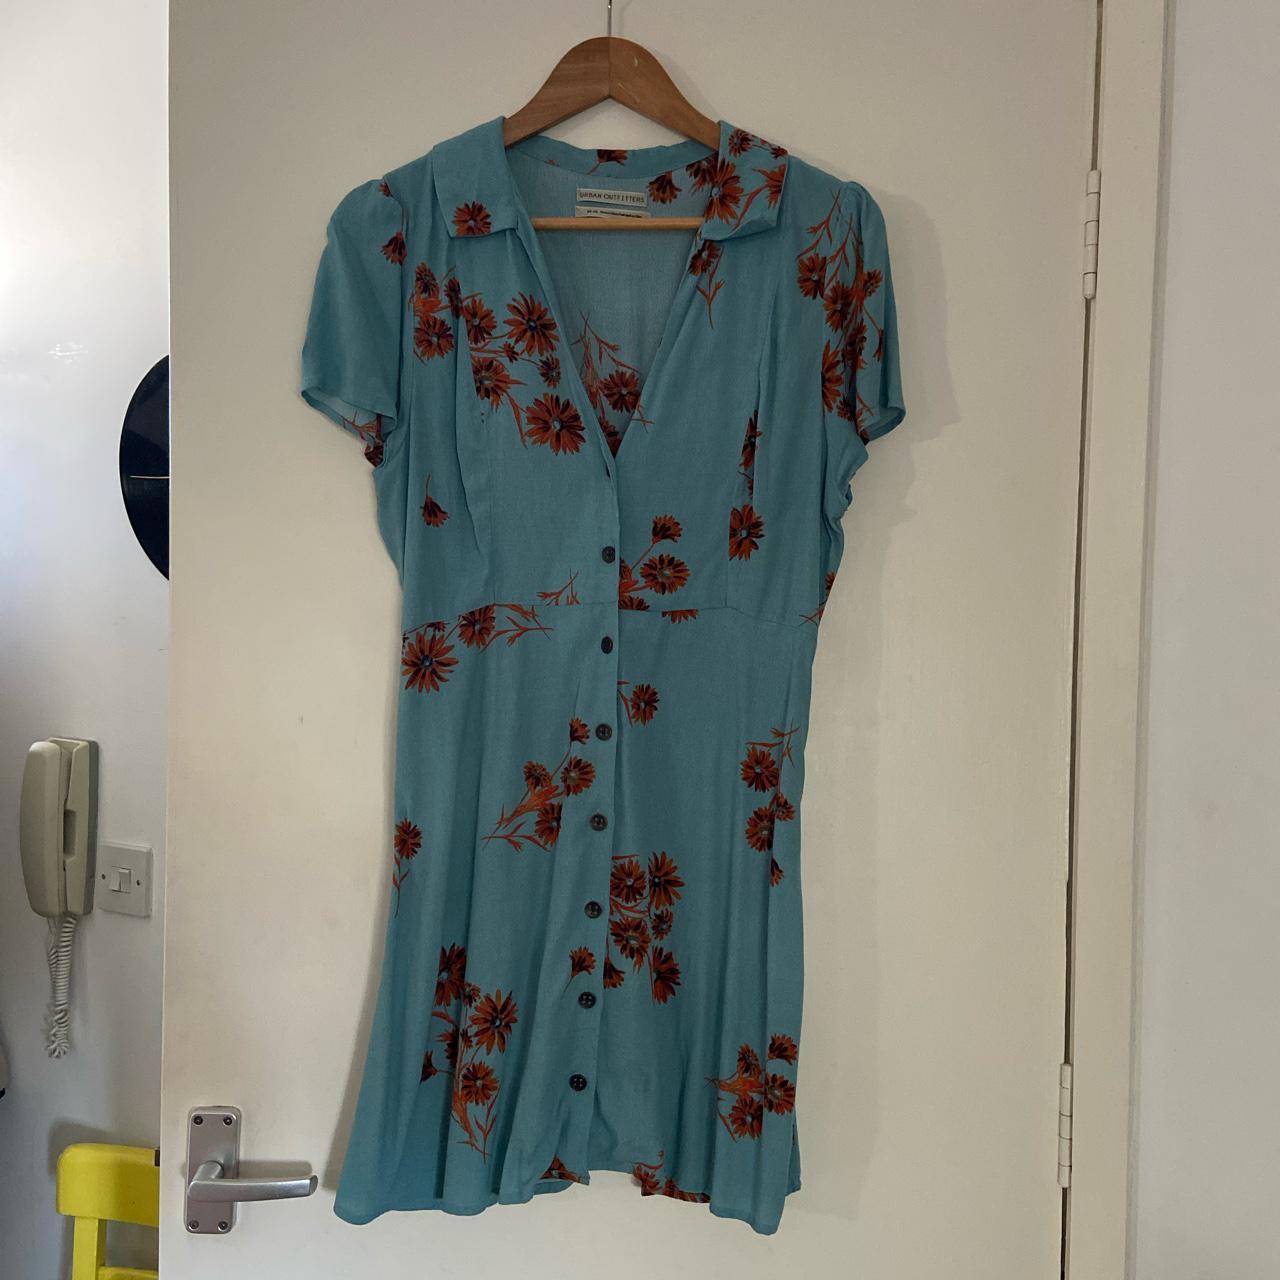 Product Image 2 - Urban outfitters dress, hardly worn!